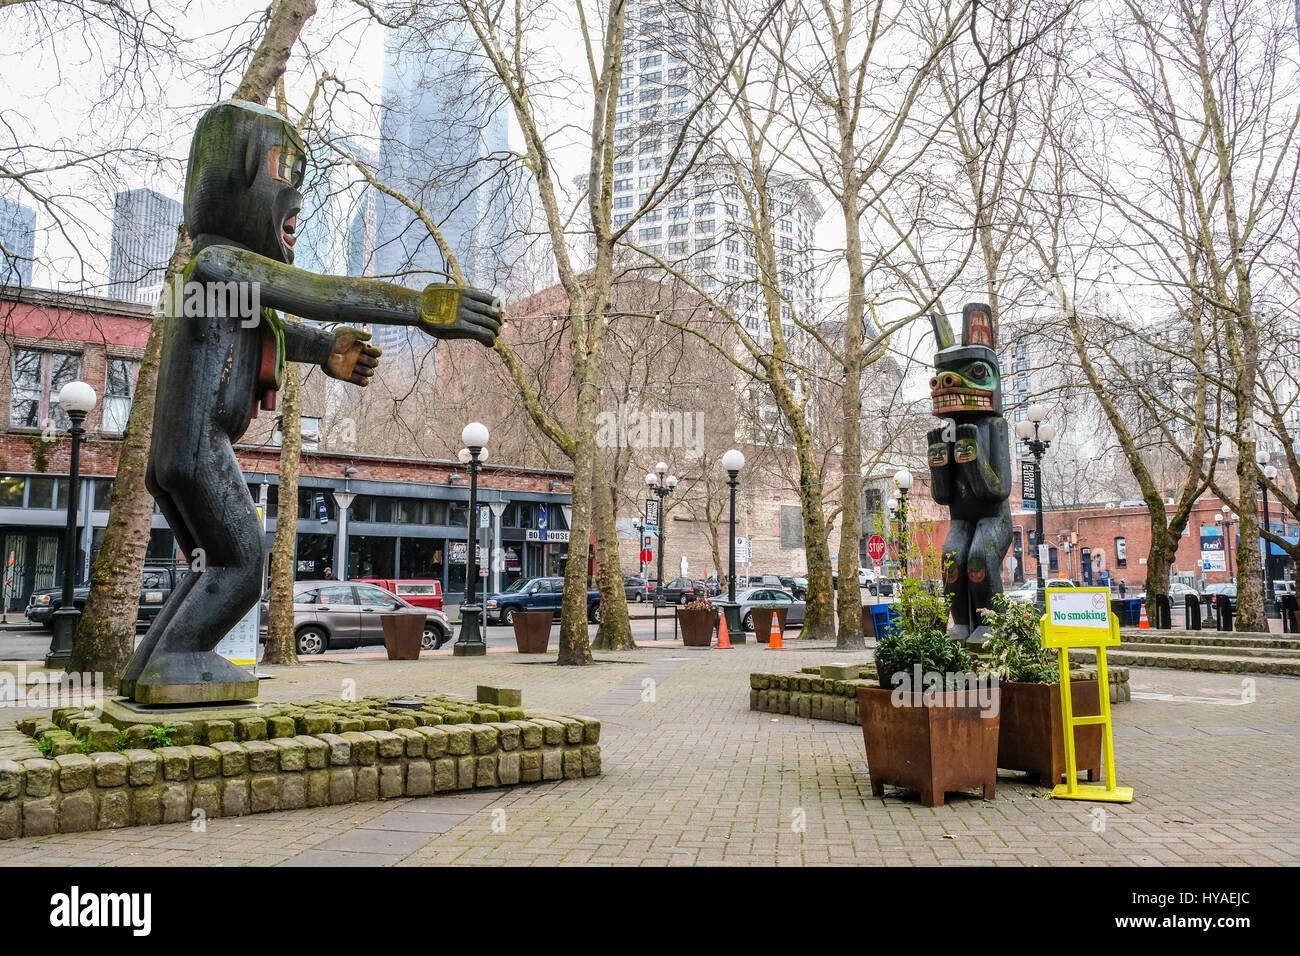 Two Northwest native American totem poles in Seattle's Pioneer Square.  No people around. Horizontal image. Stock Photo